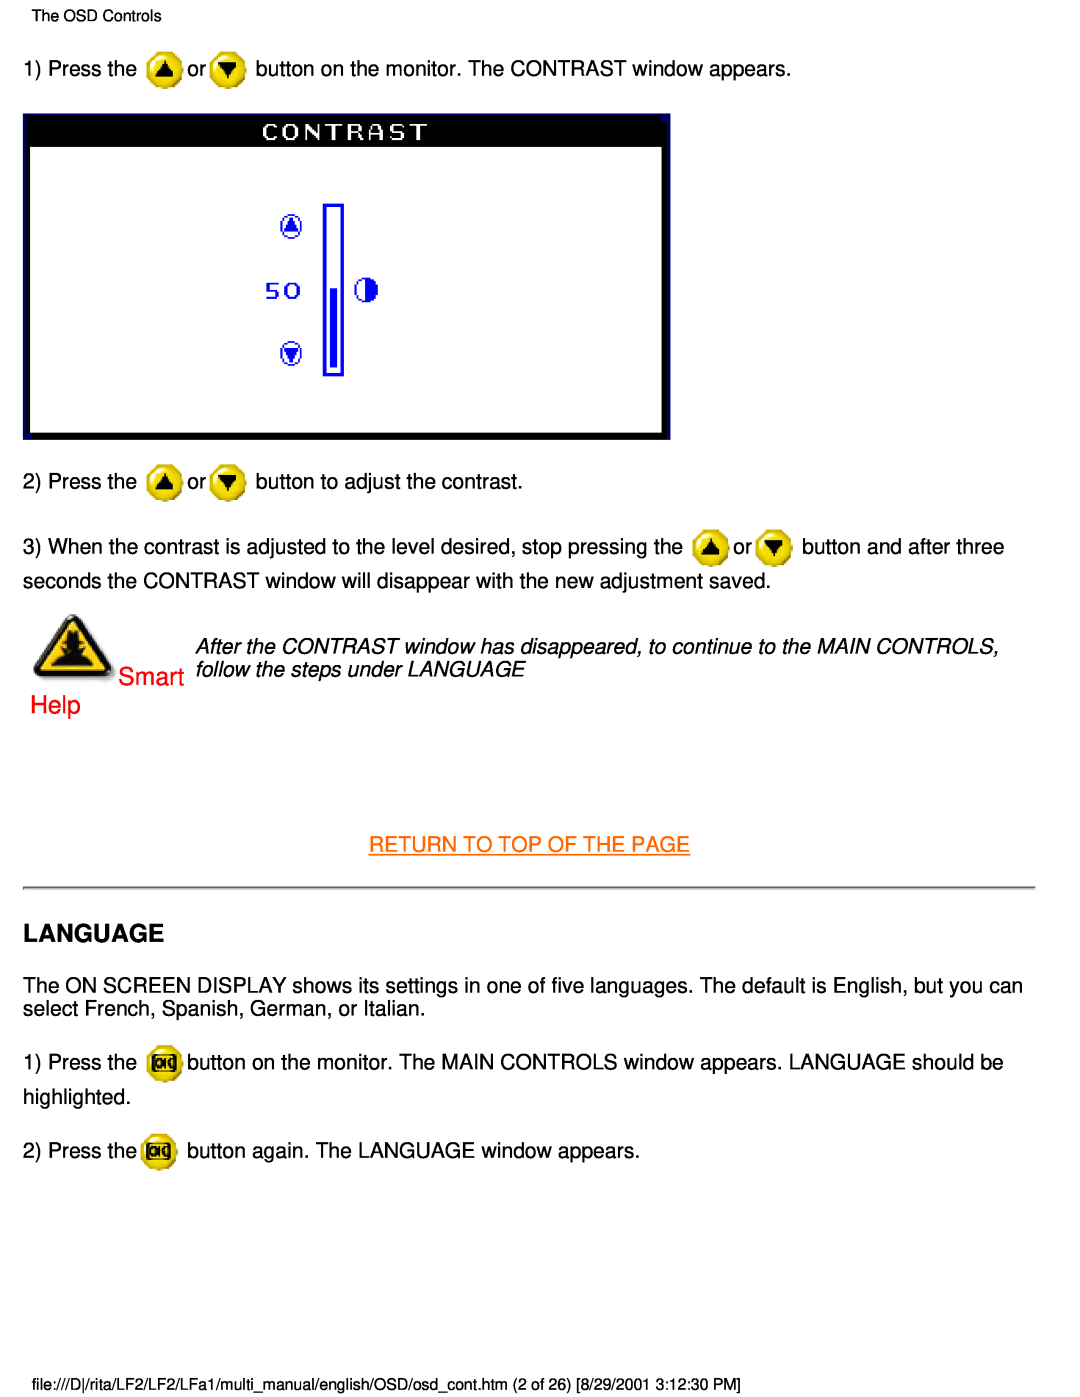 Philips 201B user manual Language, Help, Return To Top Of The Page 